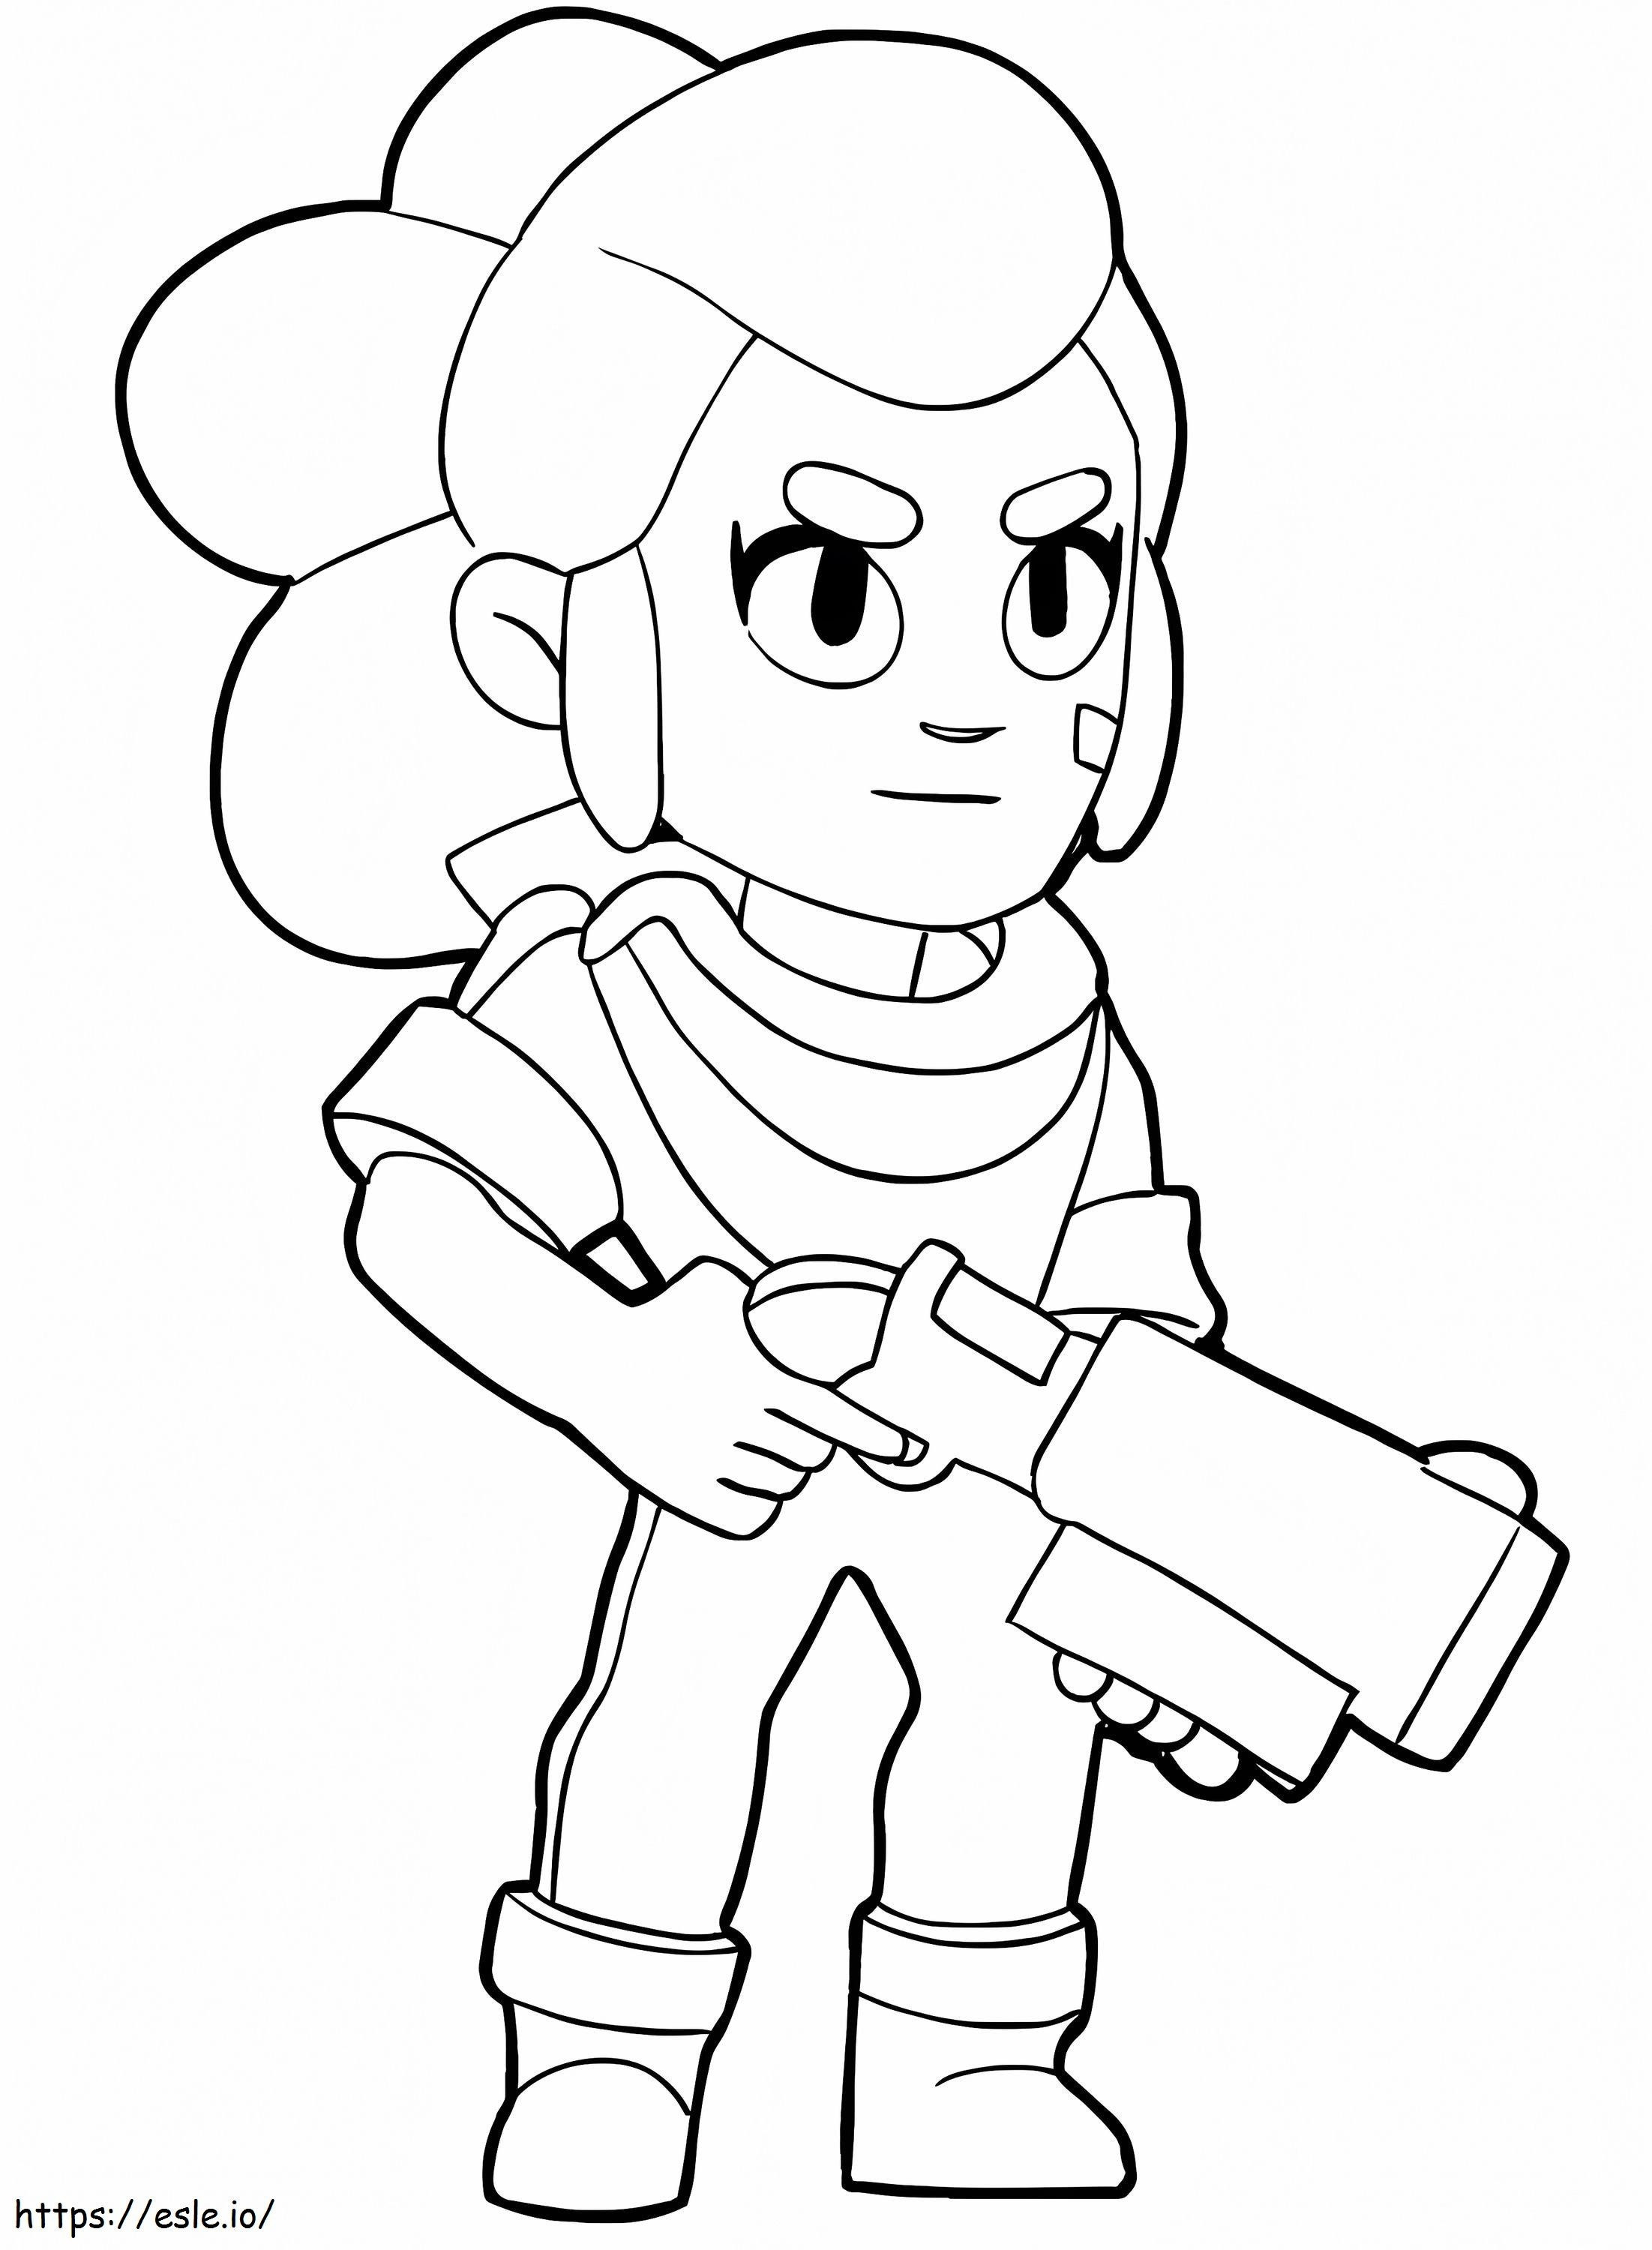 1591753088 Brawl Stars Shelly coloring page